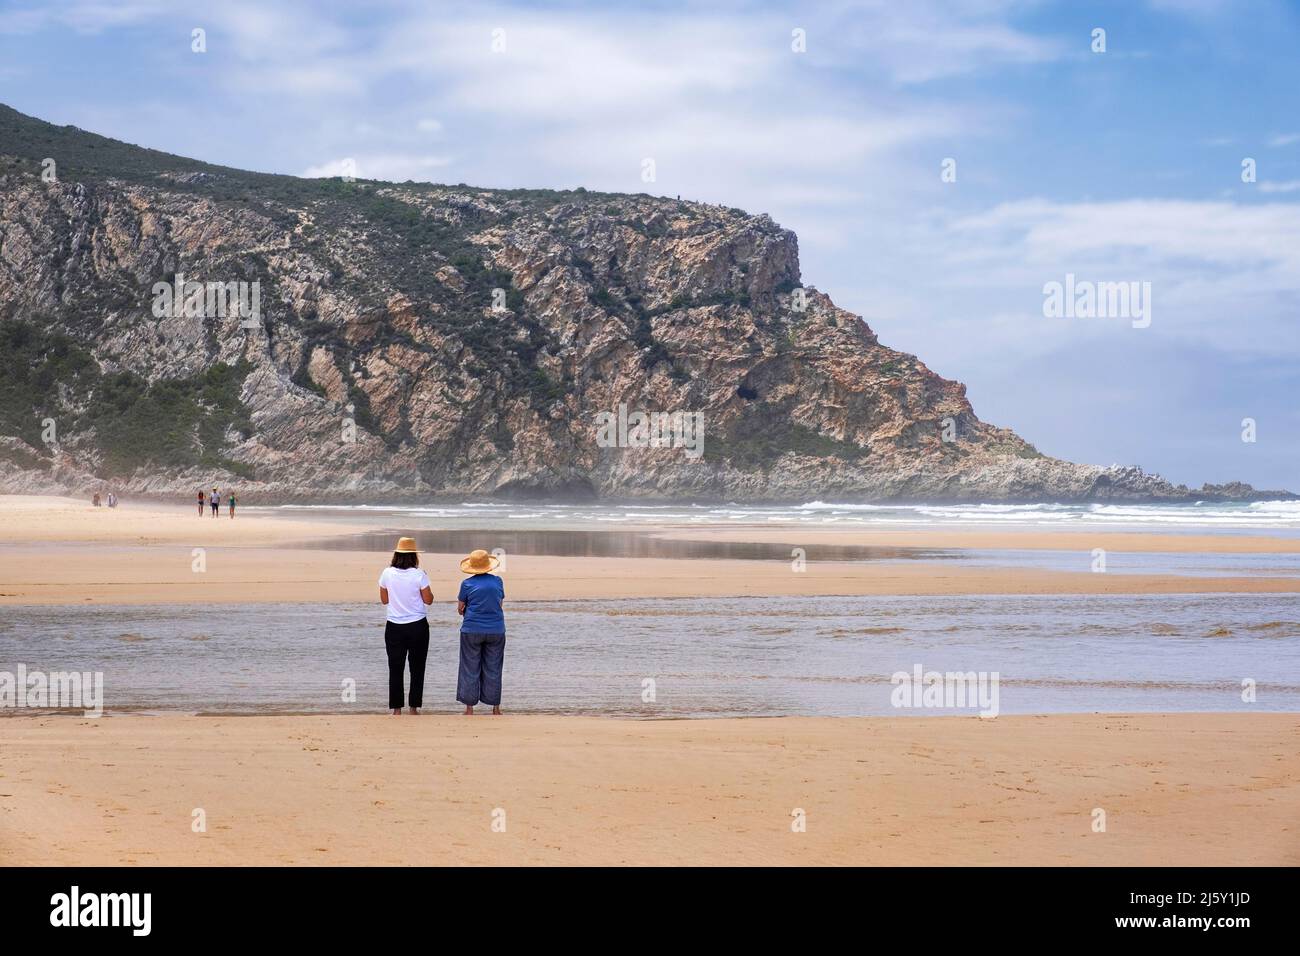 Tourists walking on Nature's Valley sandy beach in the Tsitsikamma Section of the Garden Route National Park, De Vasselot, Western Cape, South Africa Stock Photo